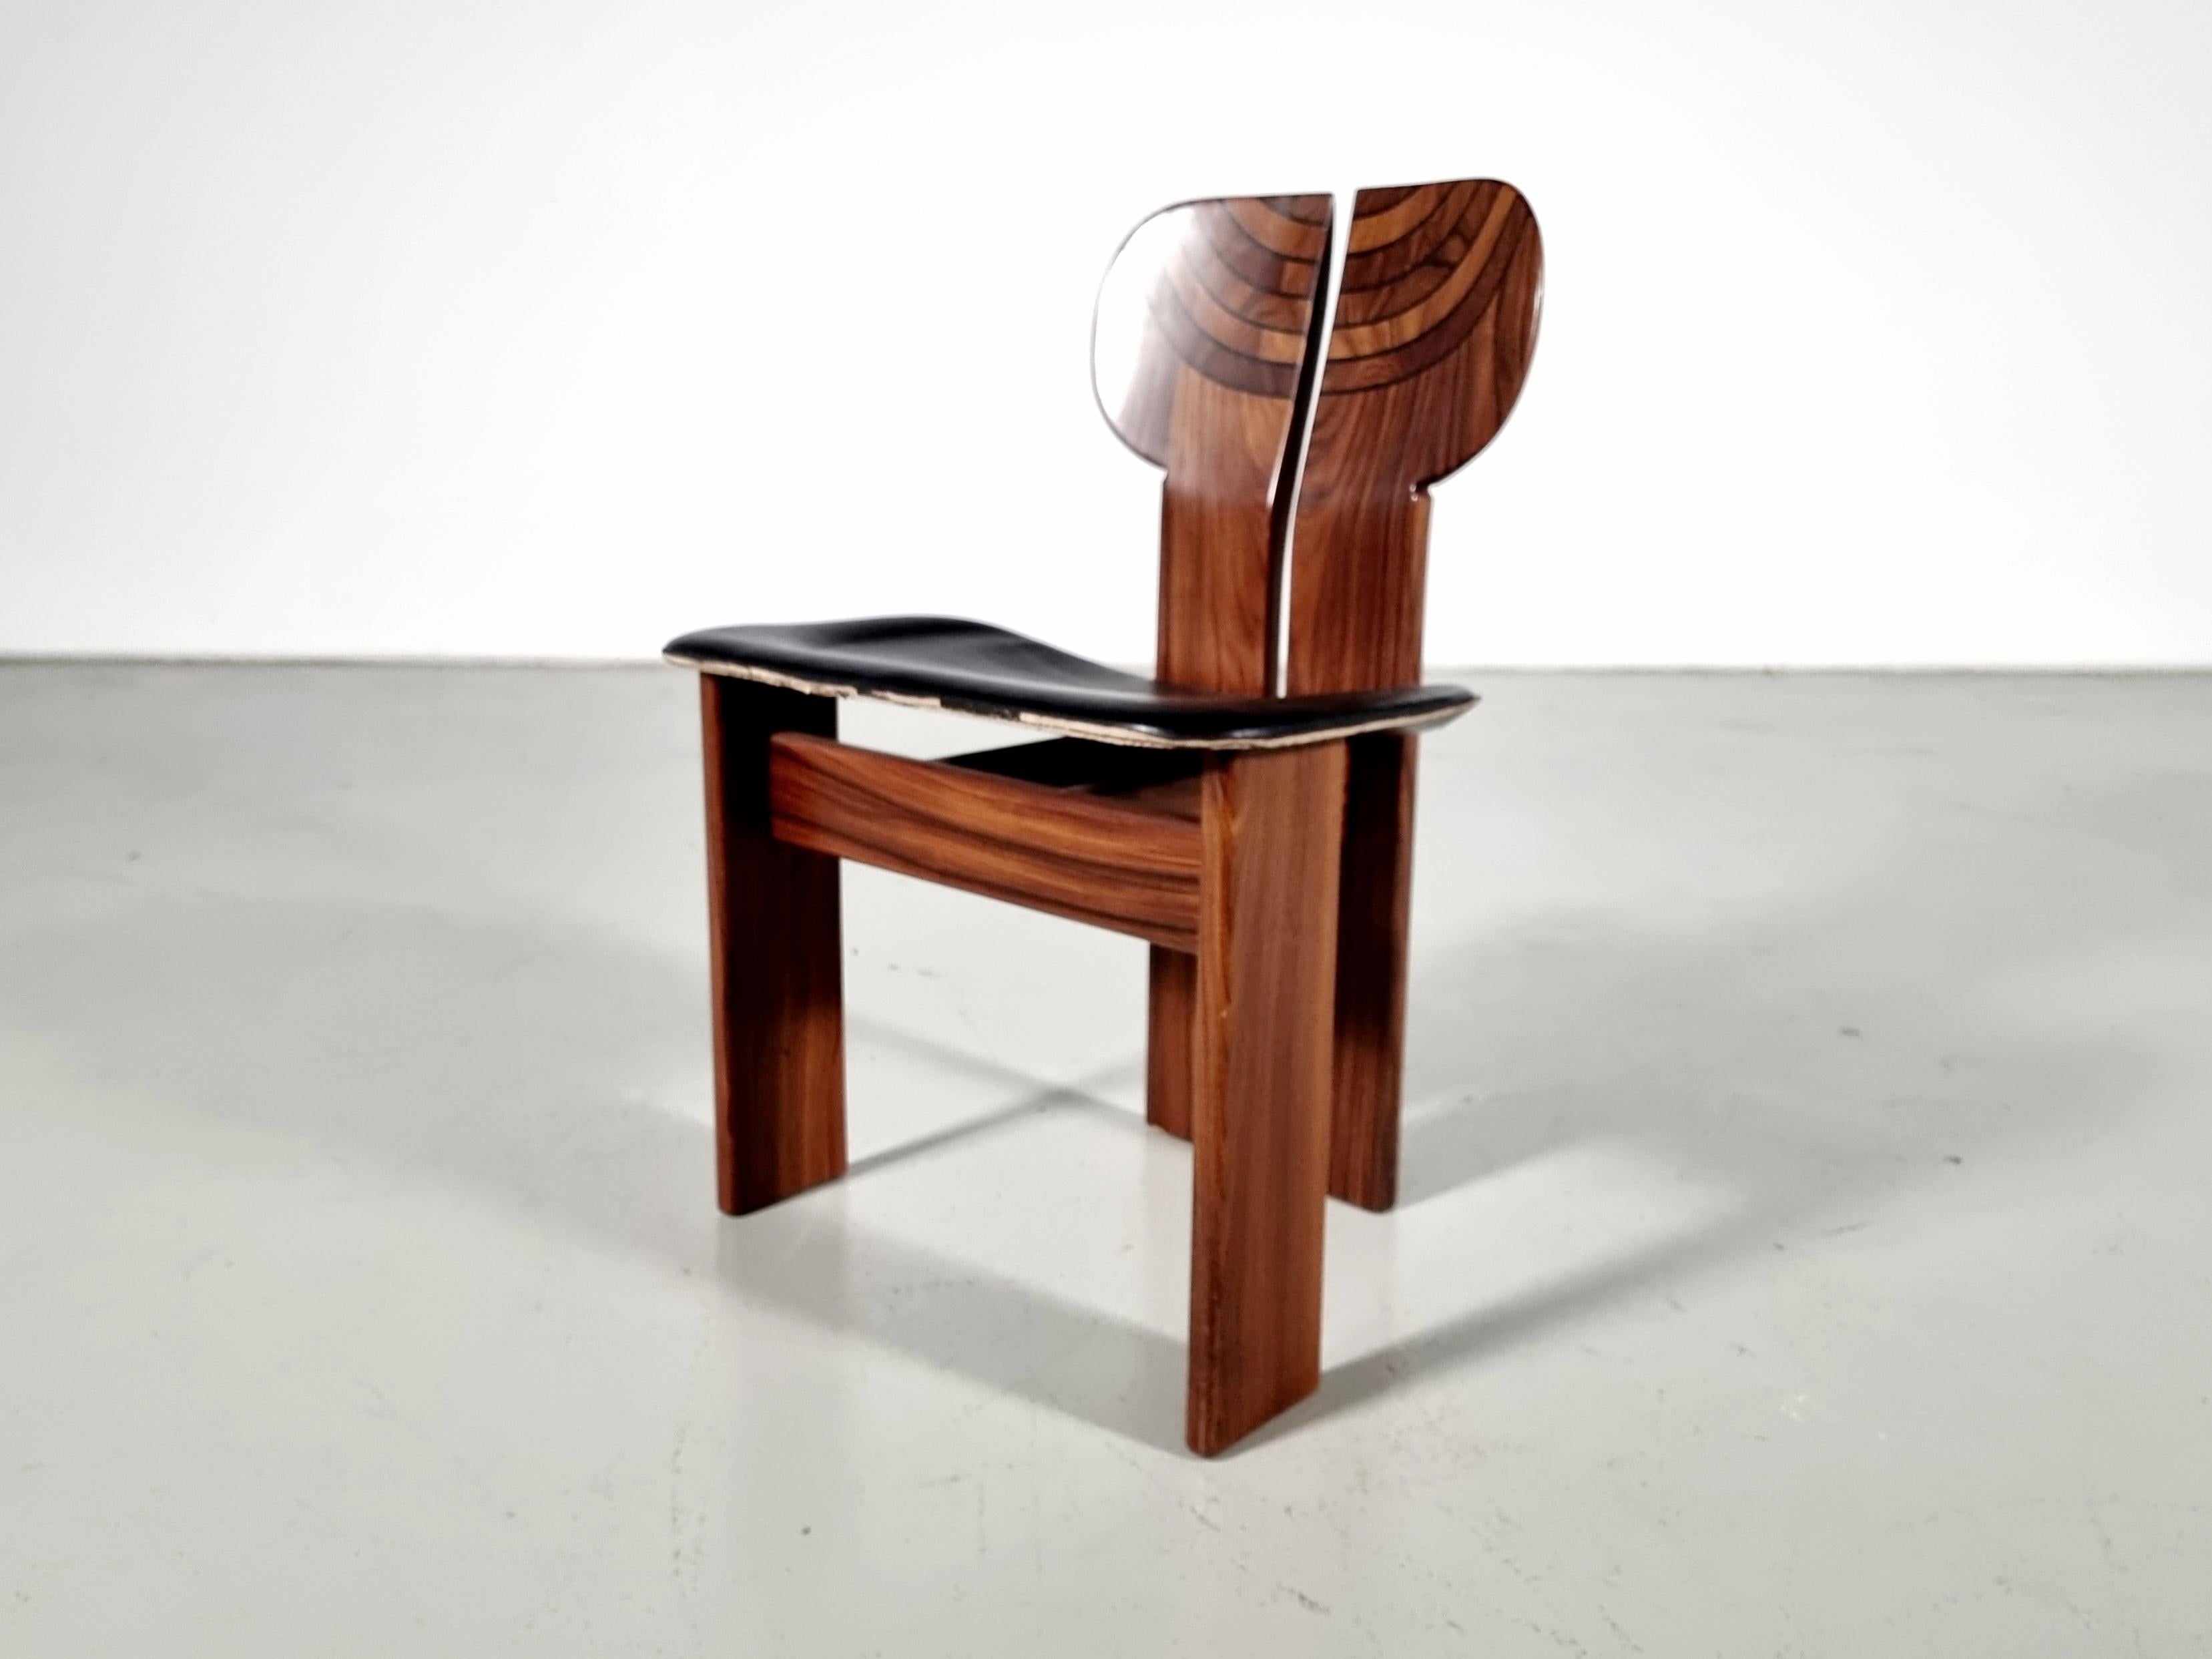 Afra & Tobia Scarpa for Maxalto, Artona 'Africa chair', black leather, walnut, ebony, and brass, Italy, the 1970s

In this model, the pattern of thicknesses of the veneers achieves the most significant impact; beyond the seat level, in curved